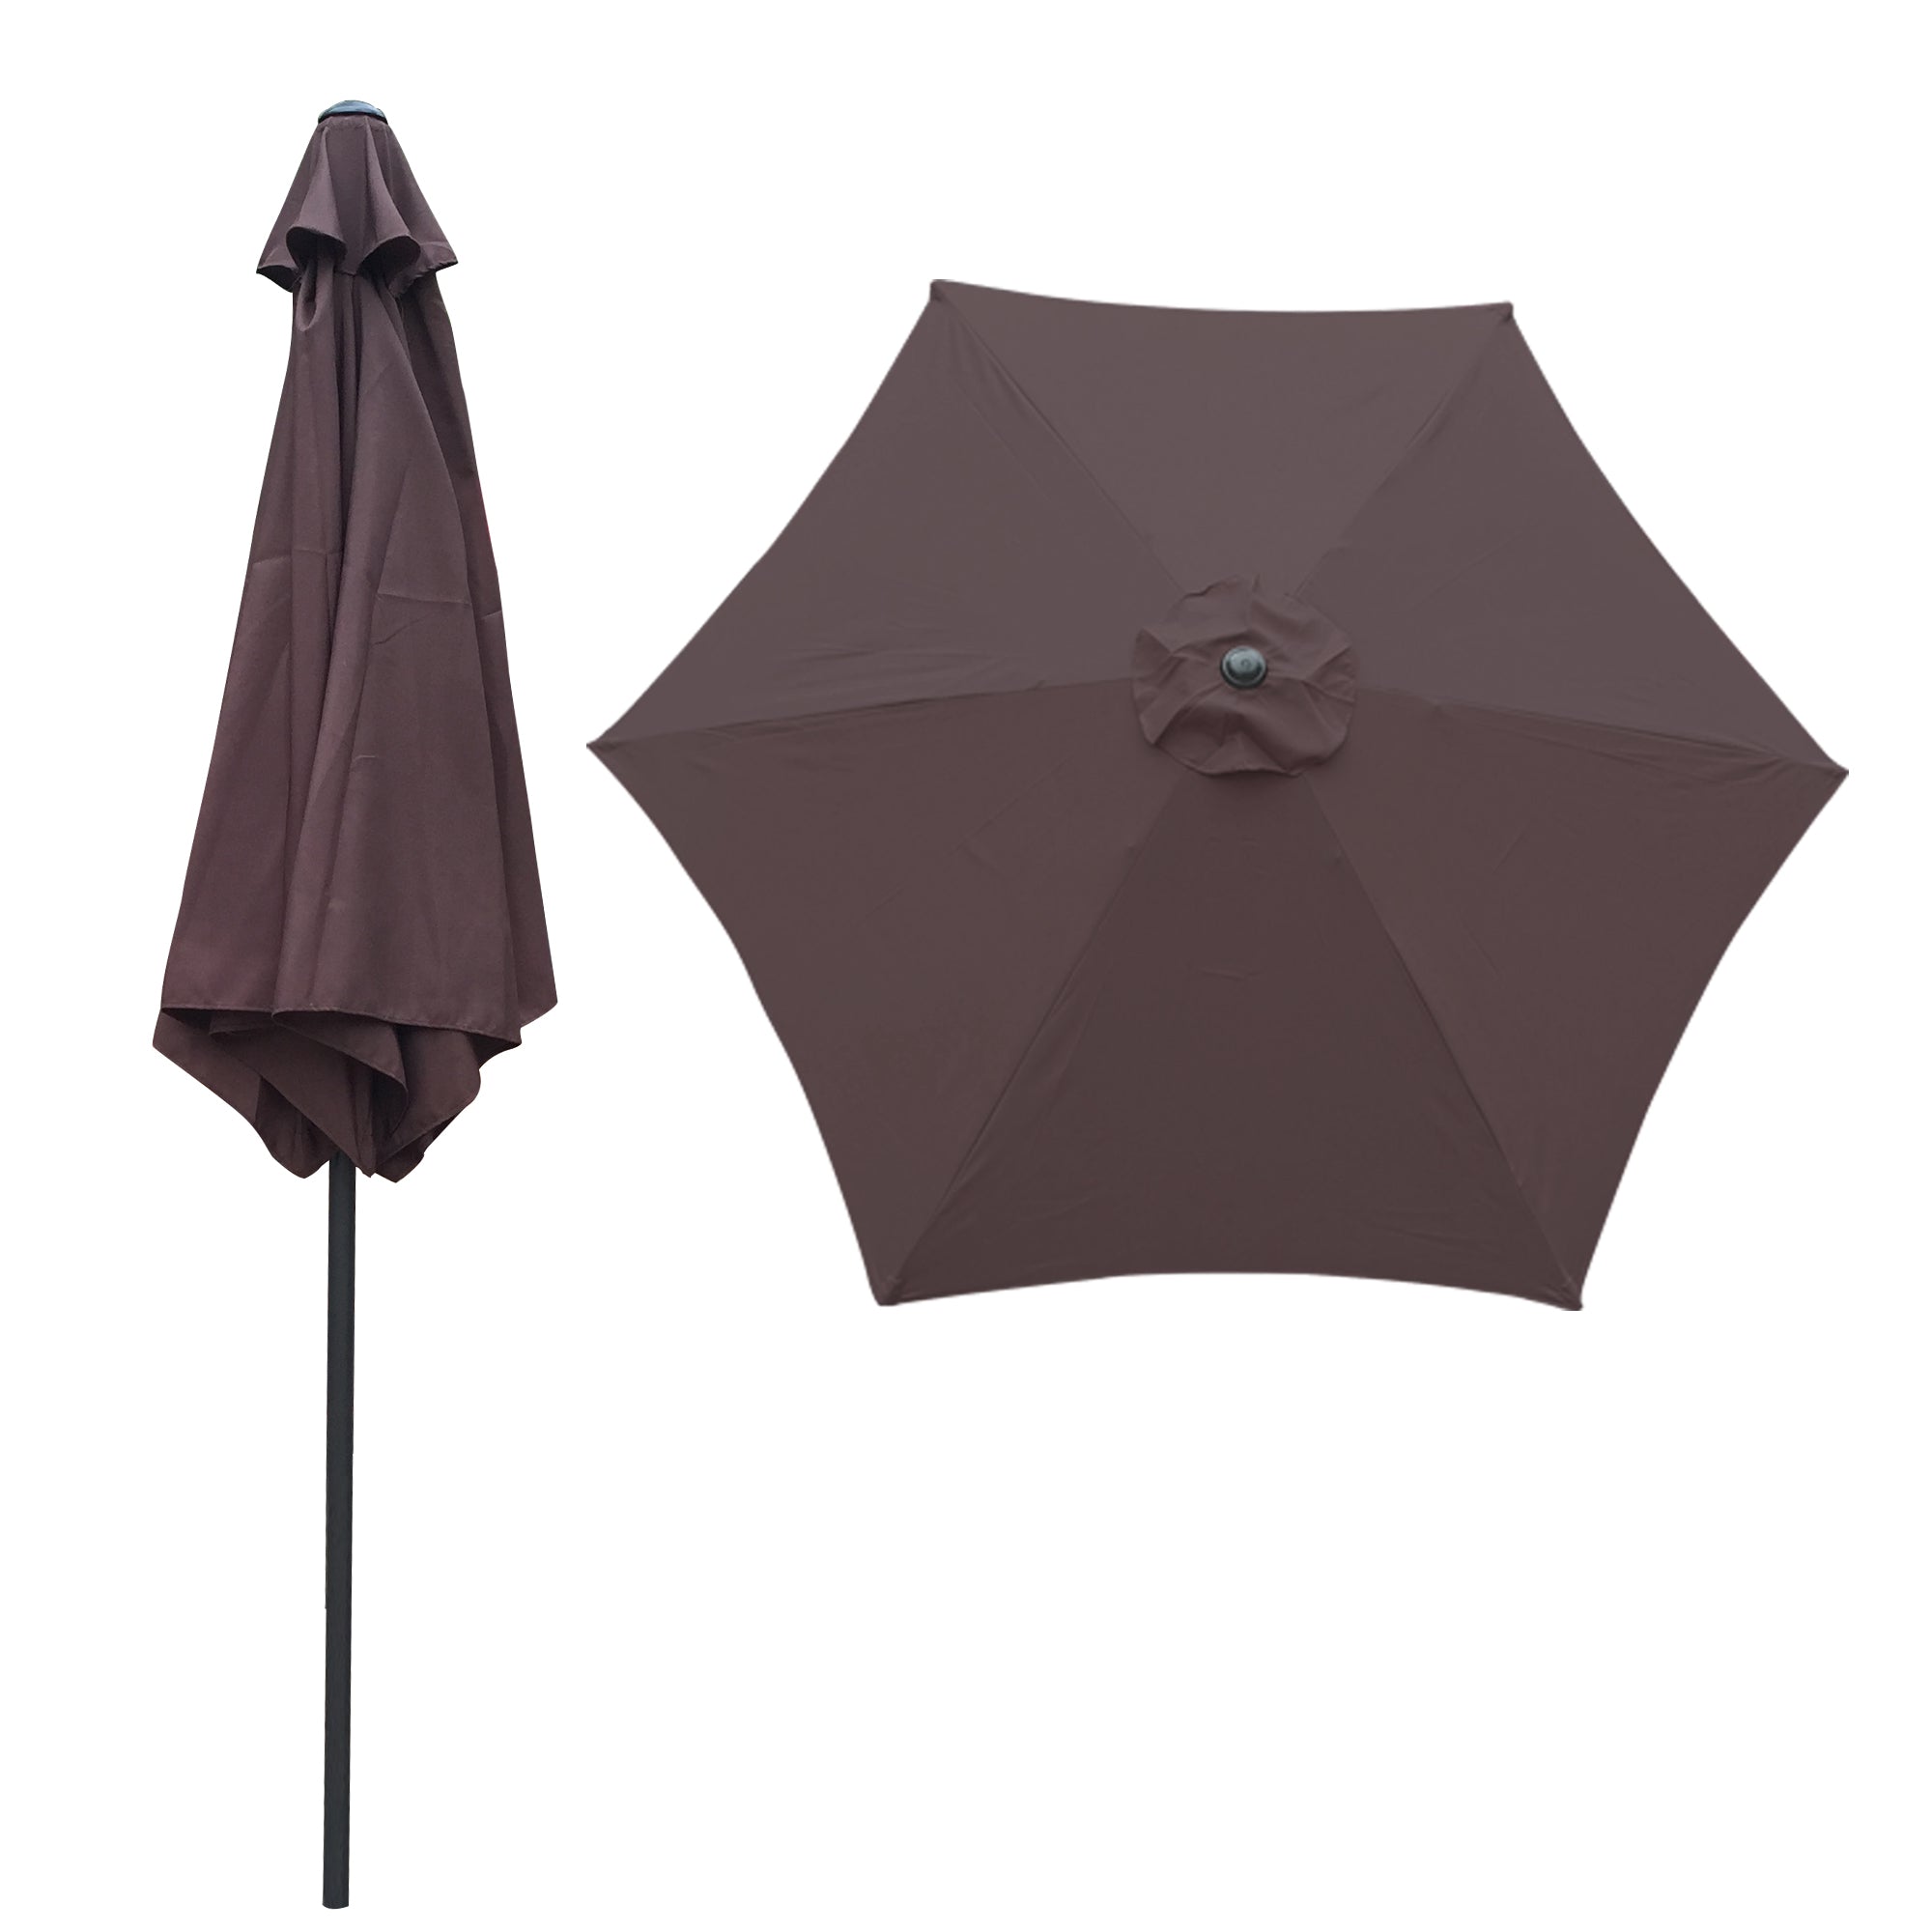 9FT Round Outdoor Market Table Umbrella Patio Umbrella with Push Button Tilt and Crank, 6 Sturdy Ribs for Garden Lawn Backyard Pool, Base Not Included - Coffee